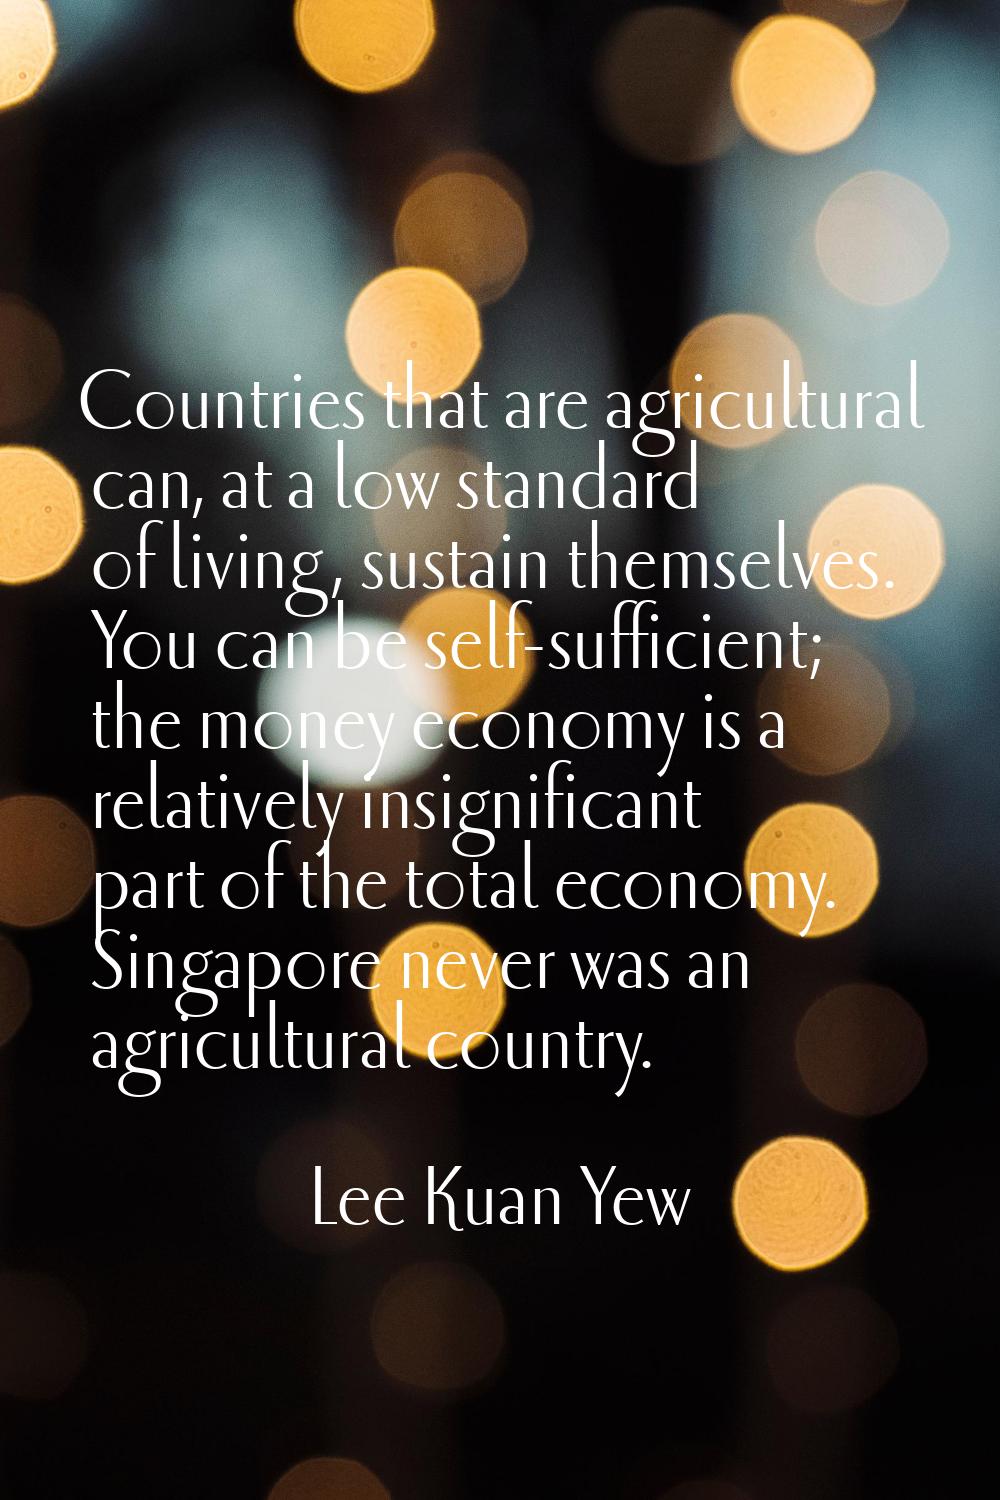 Countries that are agricultural can, at a low standard of living, sustain themselves. You can be se